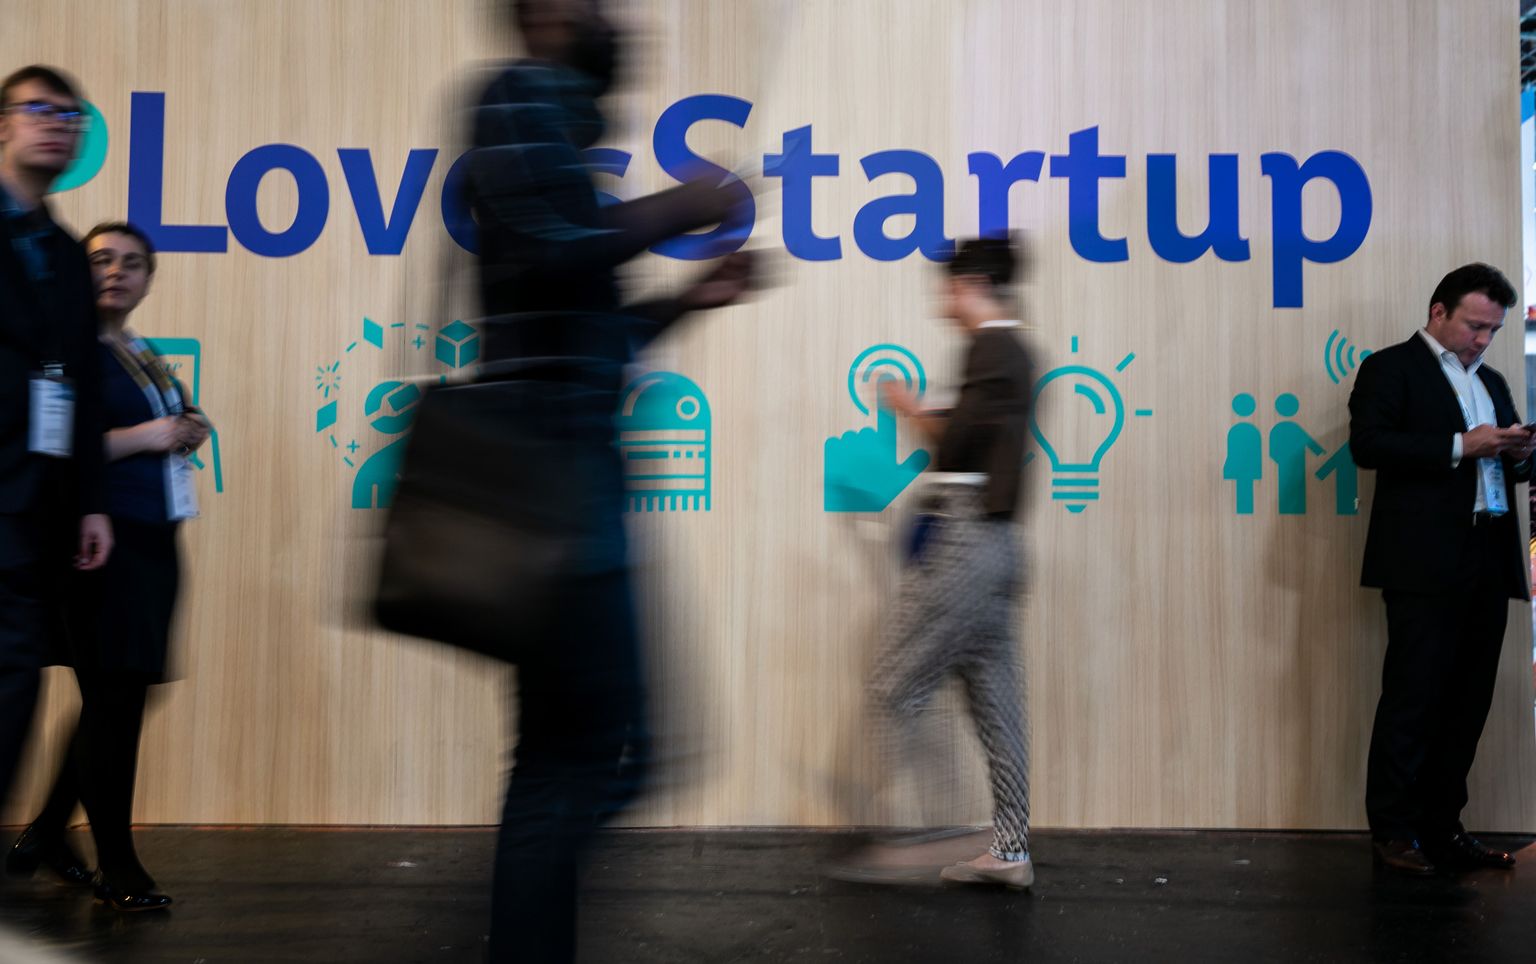 "Loves Startup" stand. Vivatech technology fair. VivaTech is the world's rendezvous for startups and leaders to celebrate innovation together. Paris, FRANCE-25/05/2018.//MEIGNEUX_meigneuxB001/Credit:ROMUALD MEIGNEUX/SIPA/1805251641